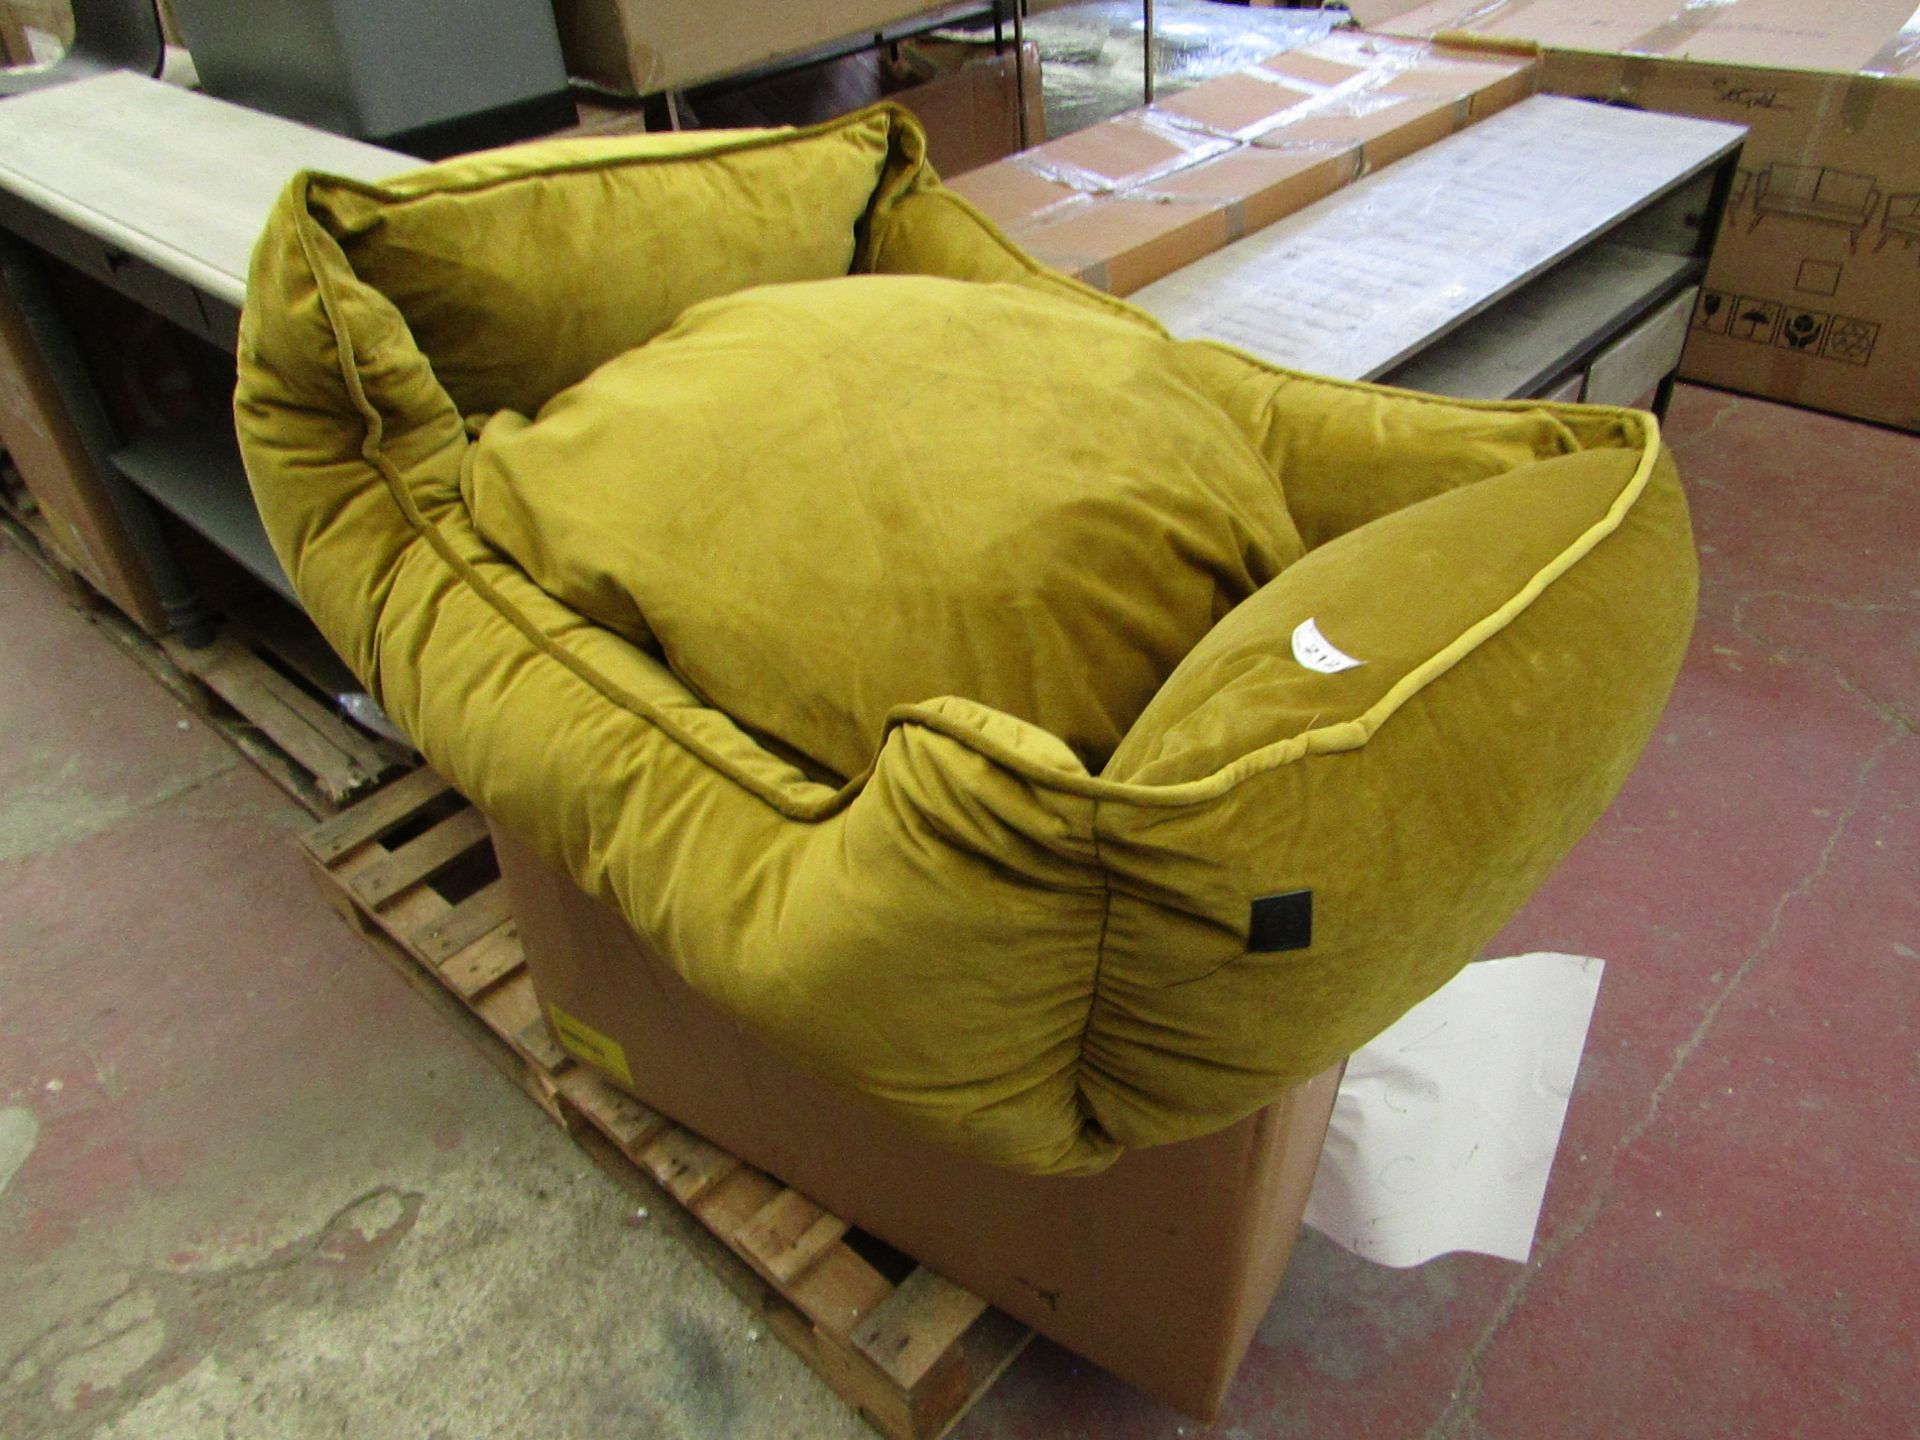 | 1X | MADE.COM KYSLER VELVET EXTRA LARGE PET BED, ANTIQUE GOLD | LOOKS IN GOOD CONDITION HOWEVER